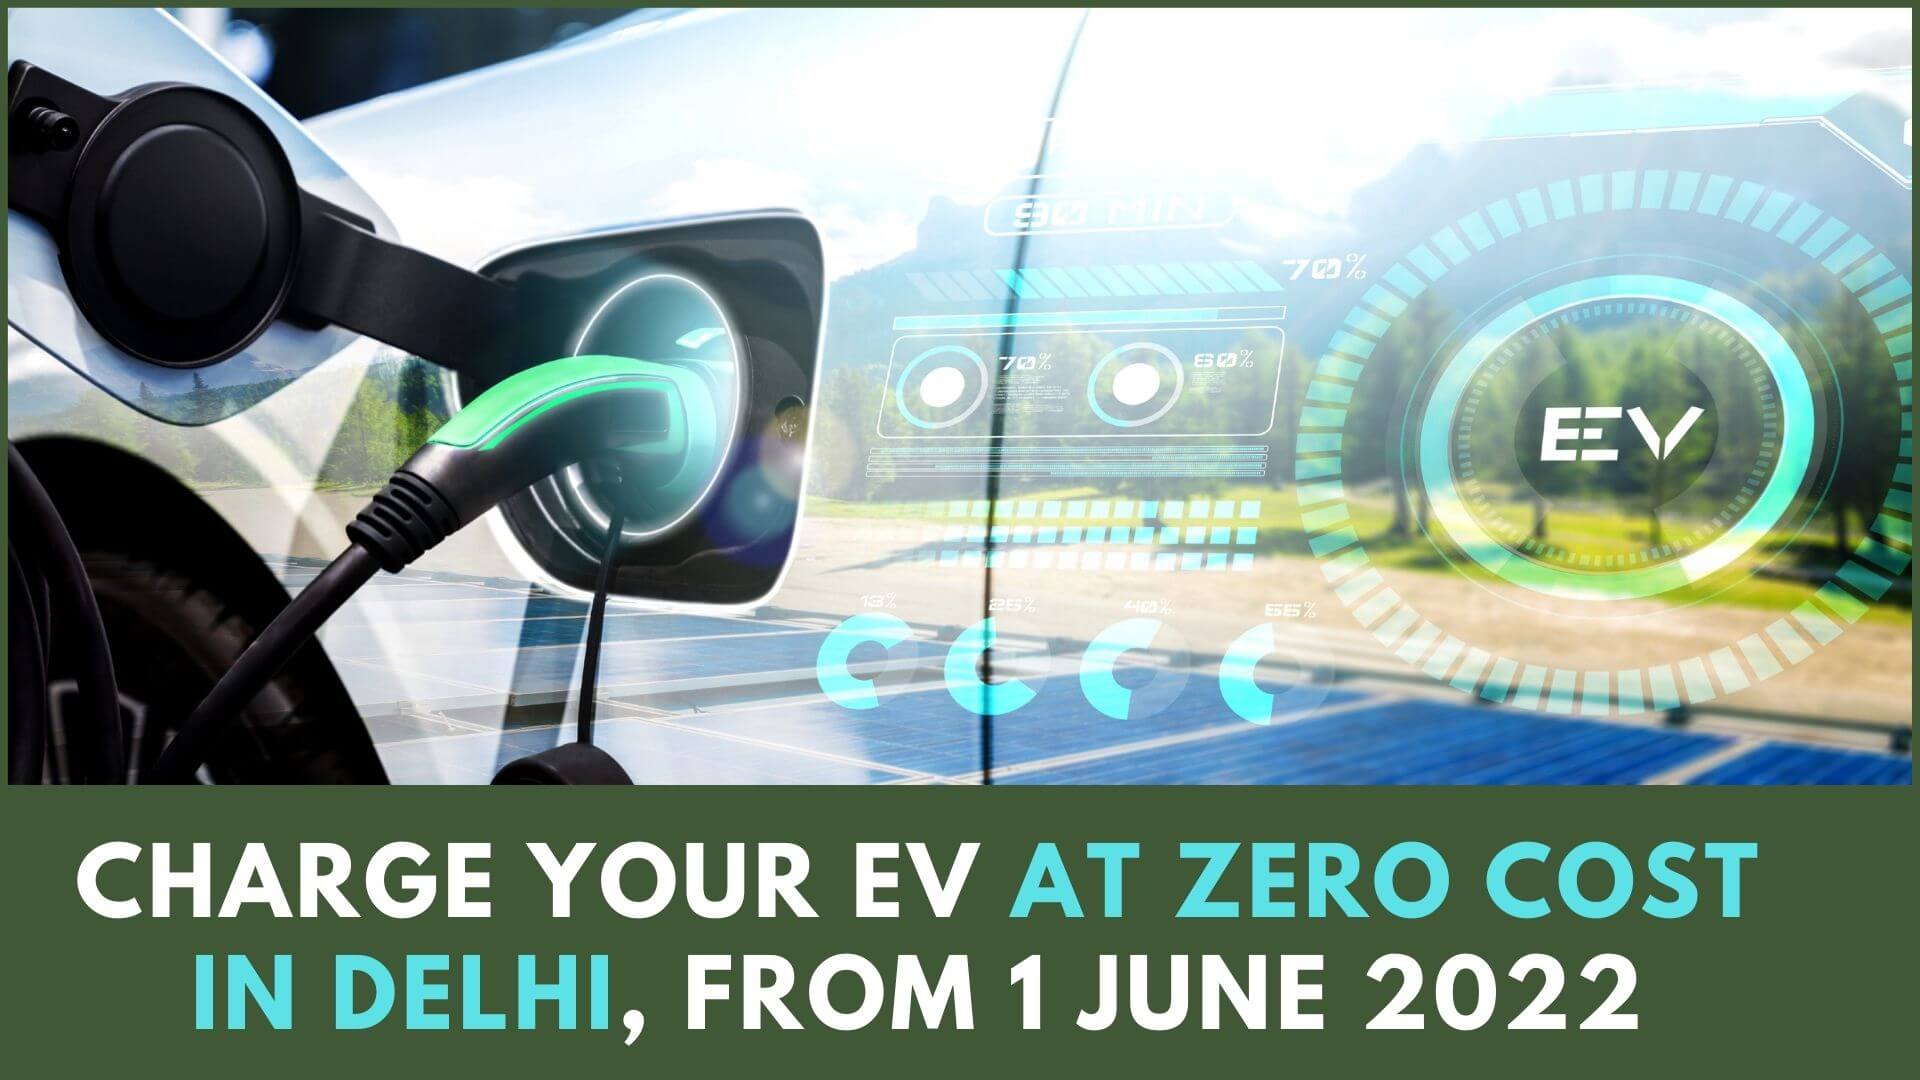 https://e-vehicleinfo.com/charge-your-ev-at-zero-cost-in-delhi-from-1-june-2022/